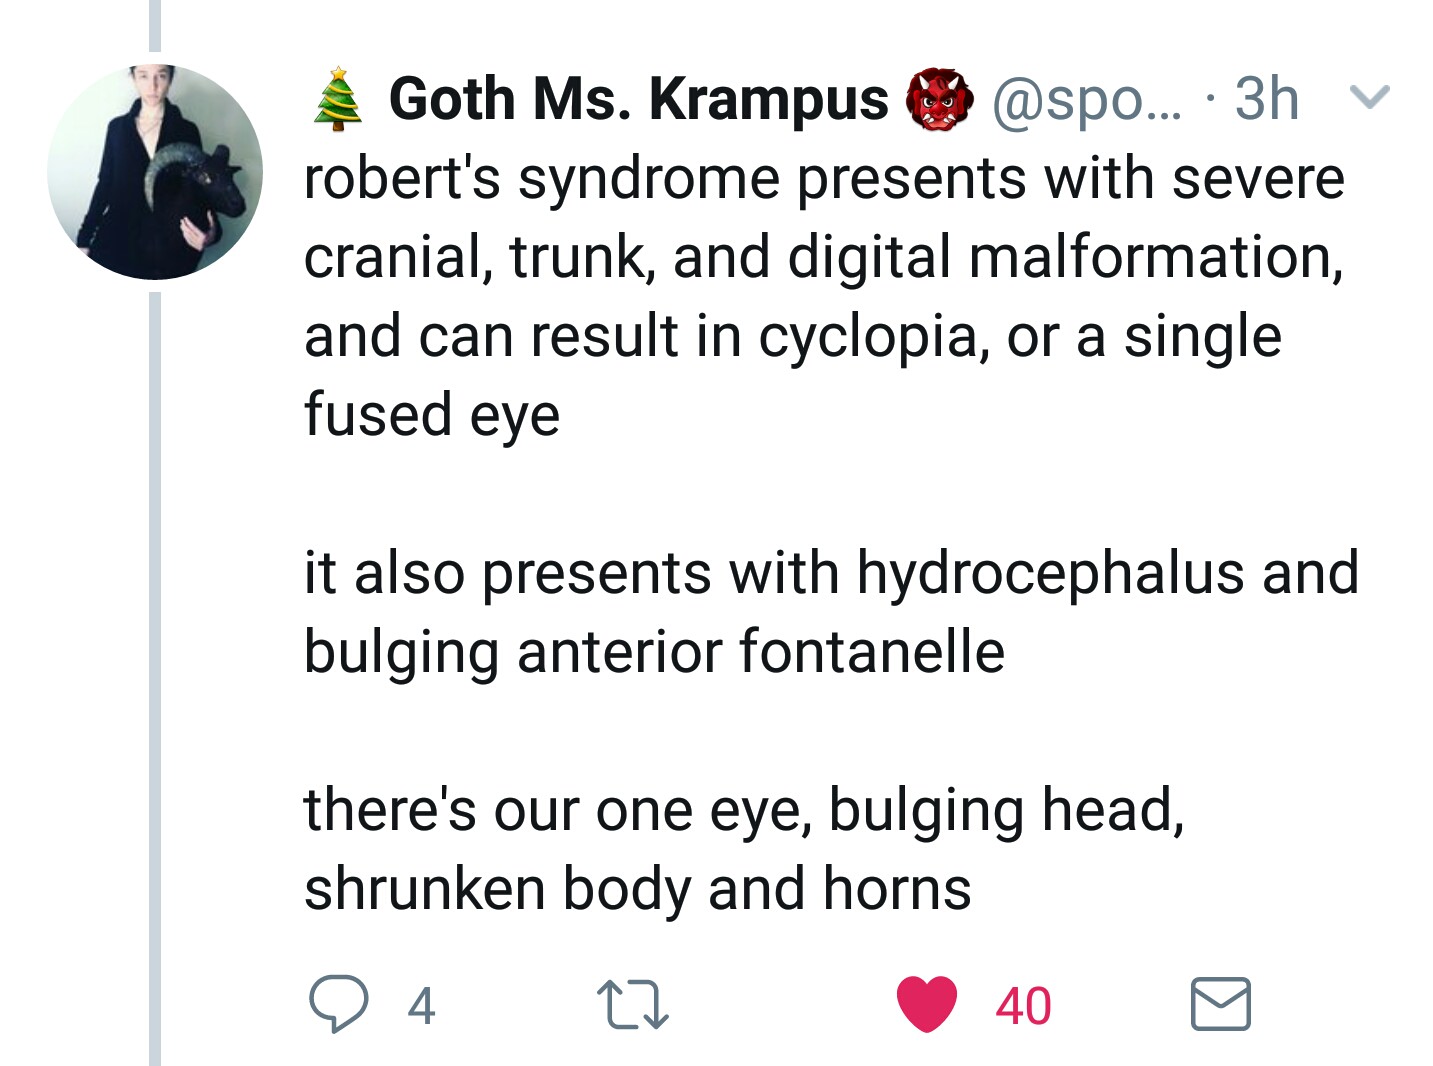 angle - Goth Ms. Krampus ... 3h v robert's syndrome presents with severe cranial, trunk, and digital malformation, and can result in cyclopia, or a single fused eye it also presents with hydrocephalus and bulging anterior fontanelle there's our one eye, b